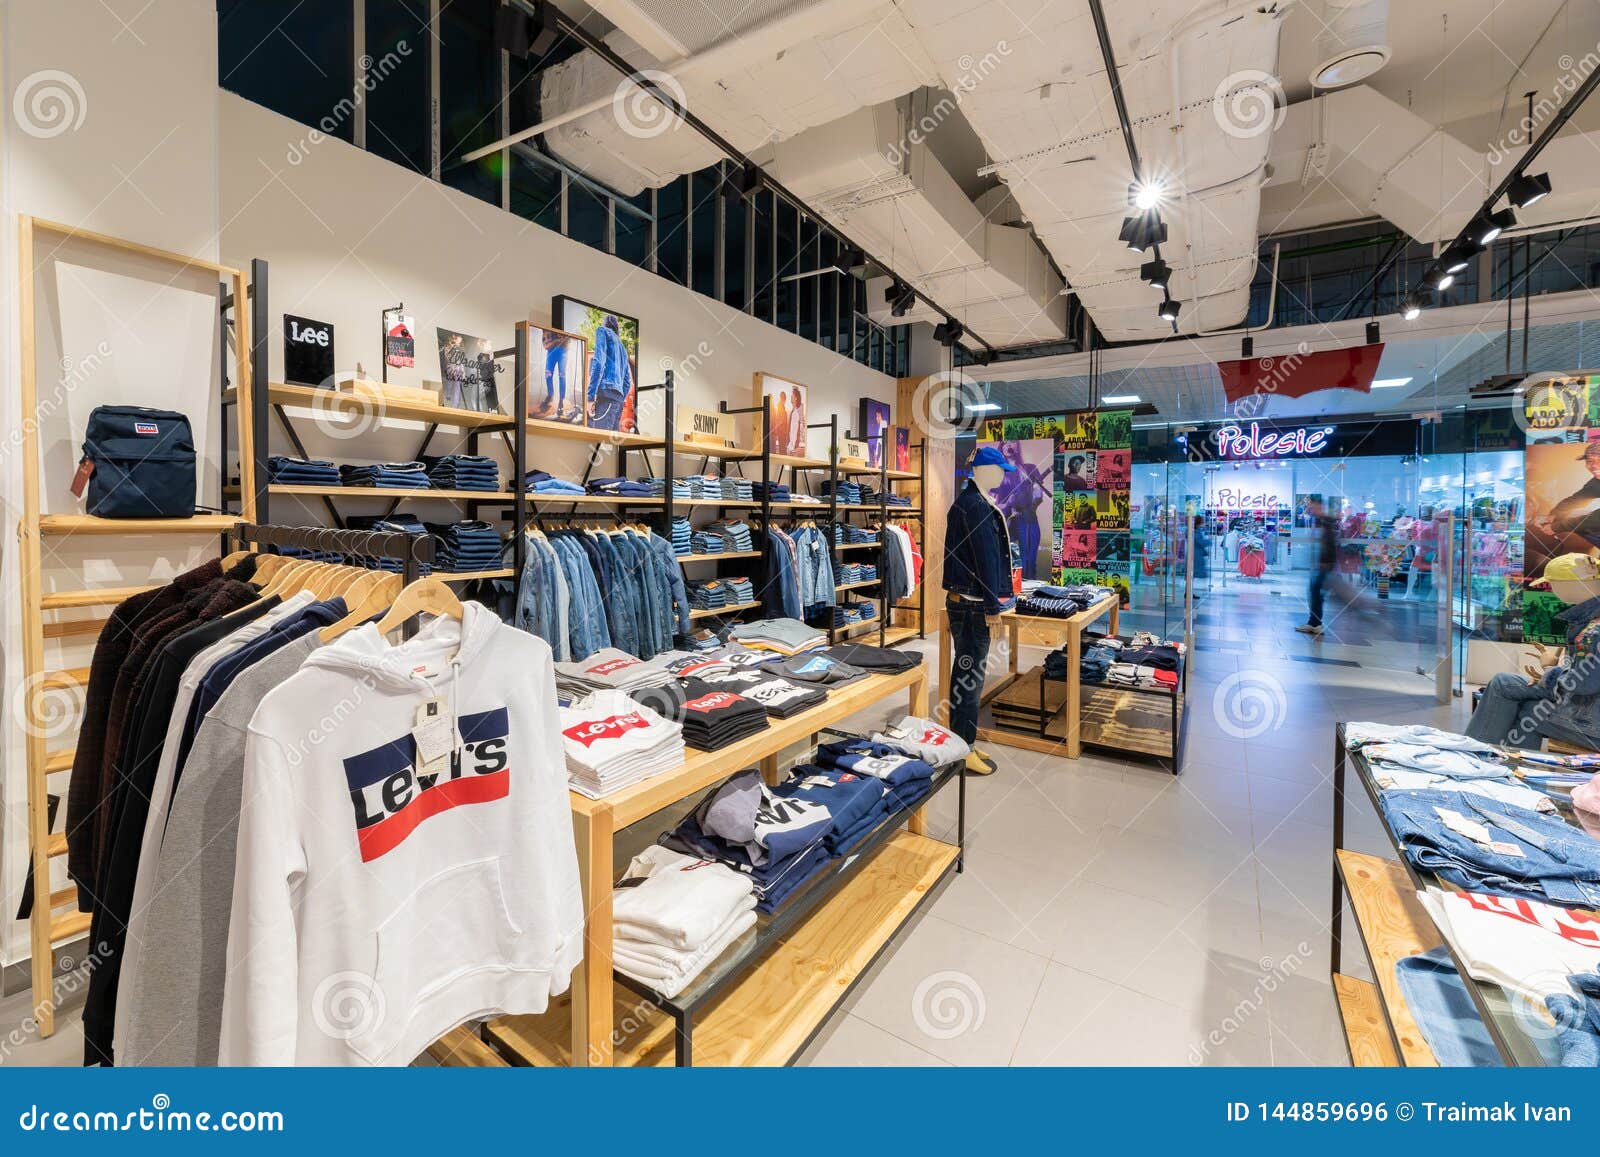 Minsk, Belarus - March 26, 2018: Interior Shot of Levis Shop Editorial  Photo - Image of products, retail: 144859696